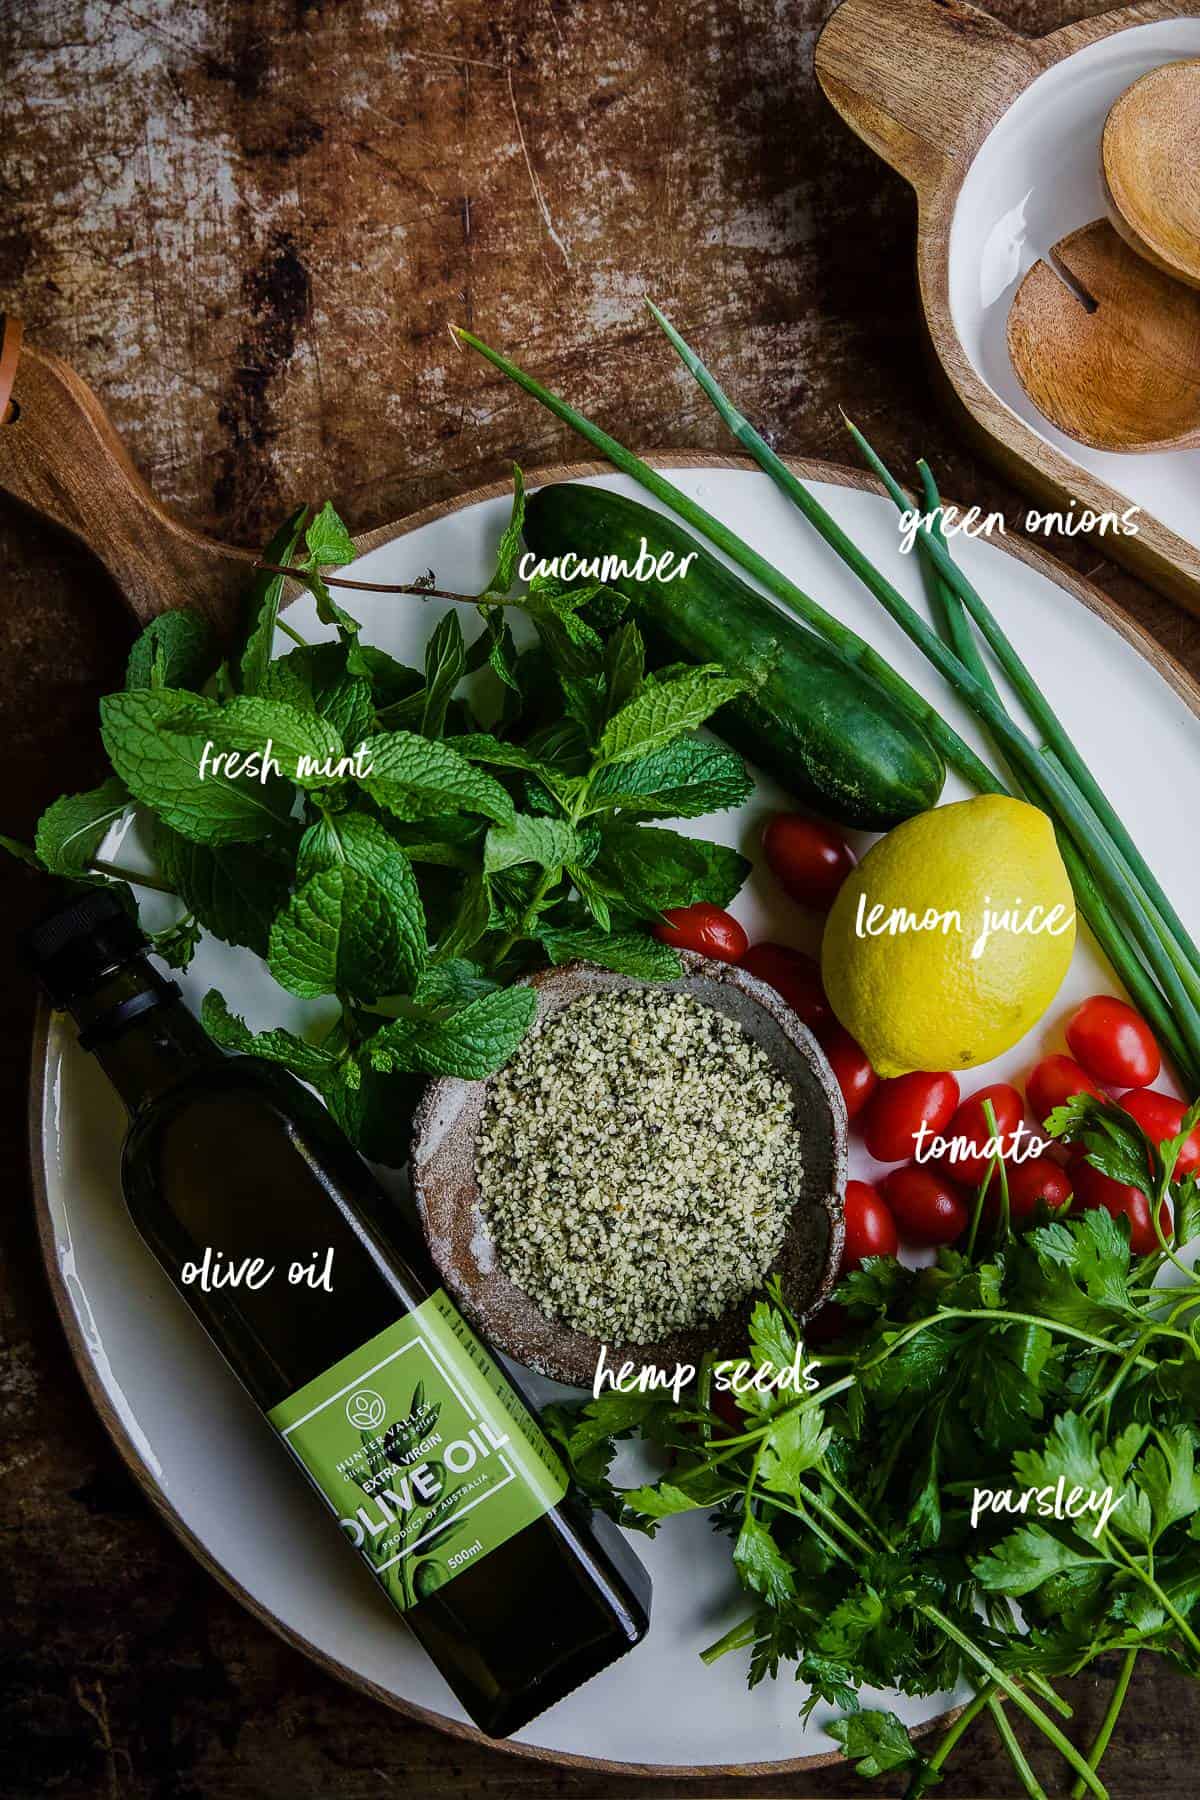 Taboule ingredients on a white platter with labels.